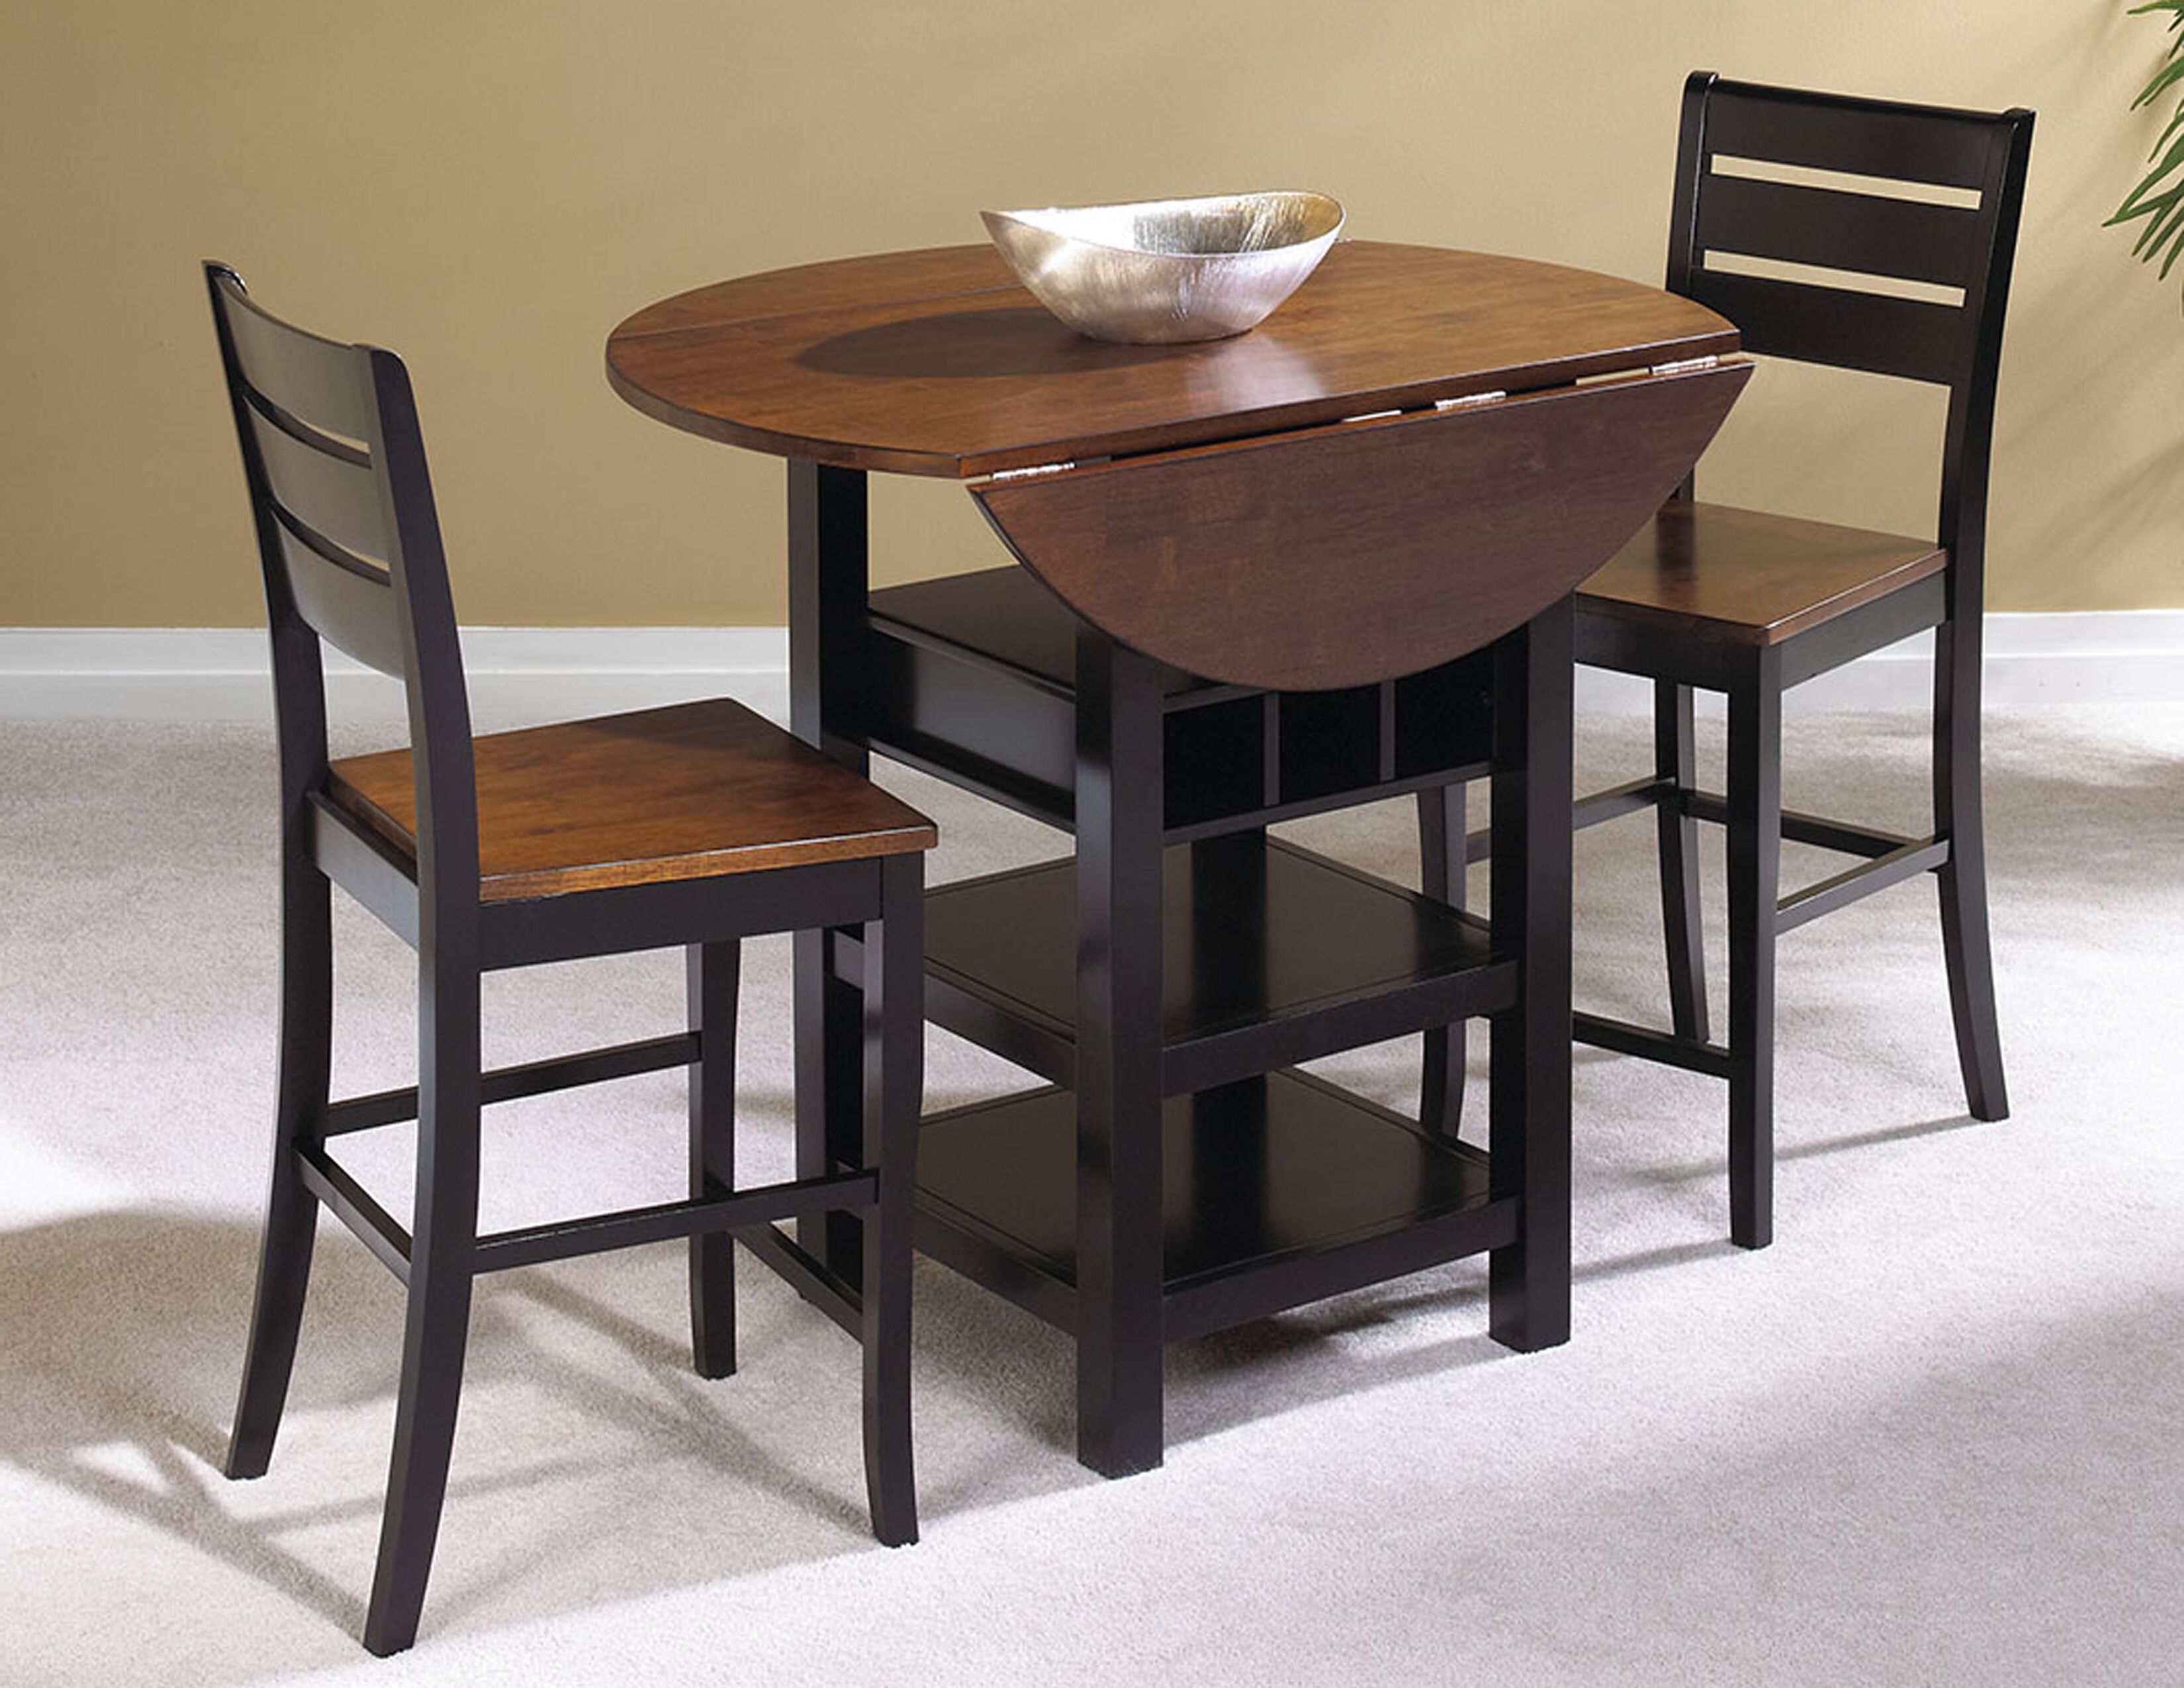 Berrios 3 Piece Counter Height Dining Sets Inside Well Known Atwater 3 Piece Counter Height Dining Set (View 3 of 20)